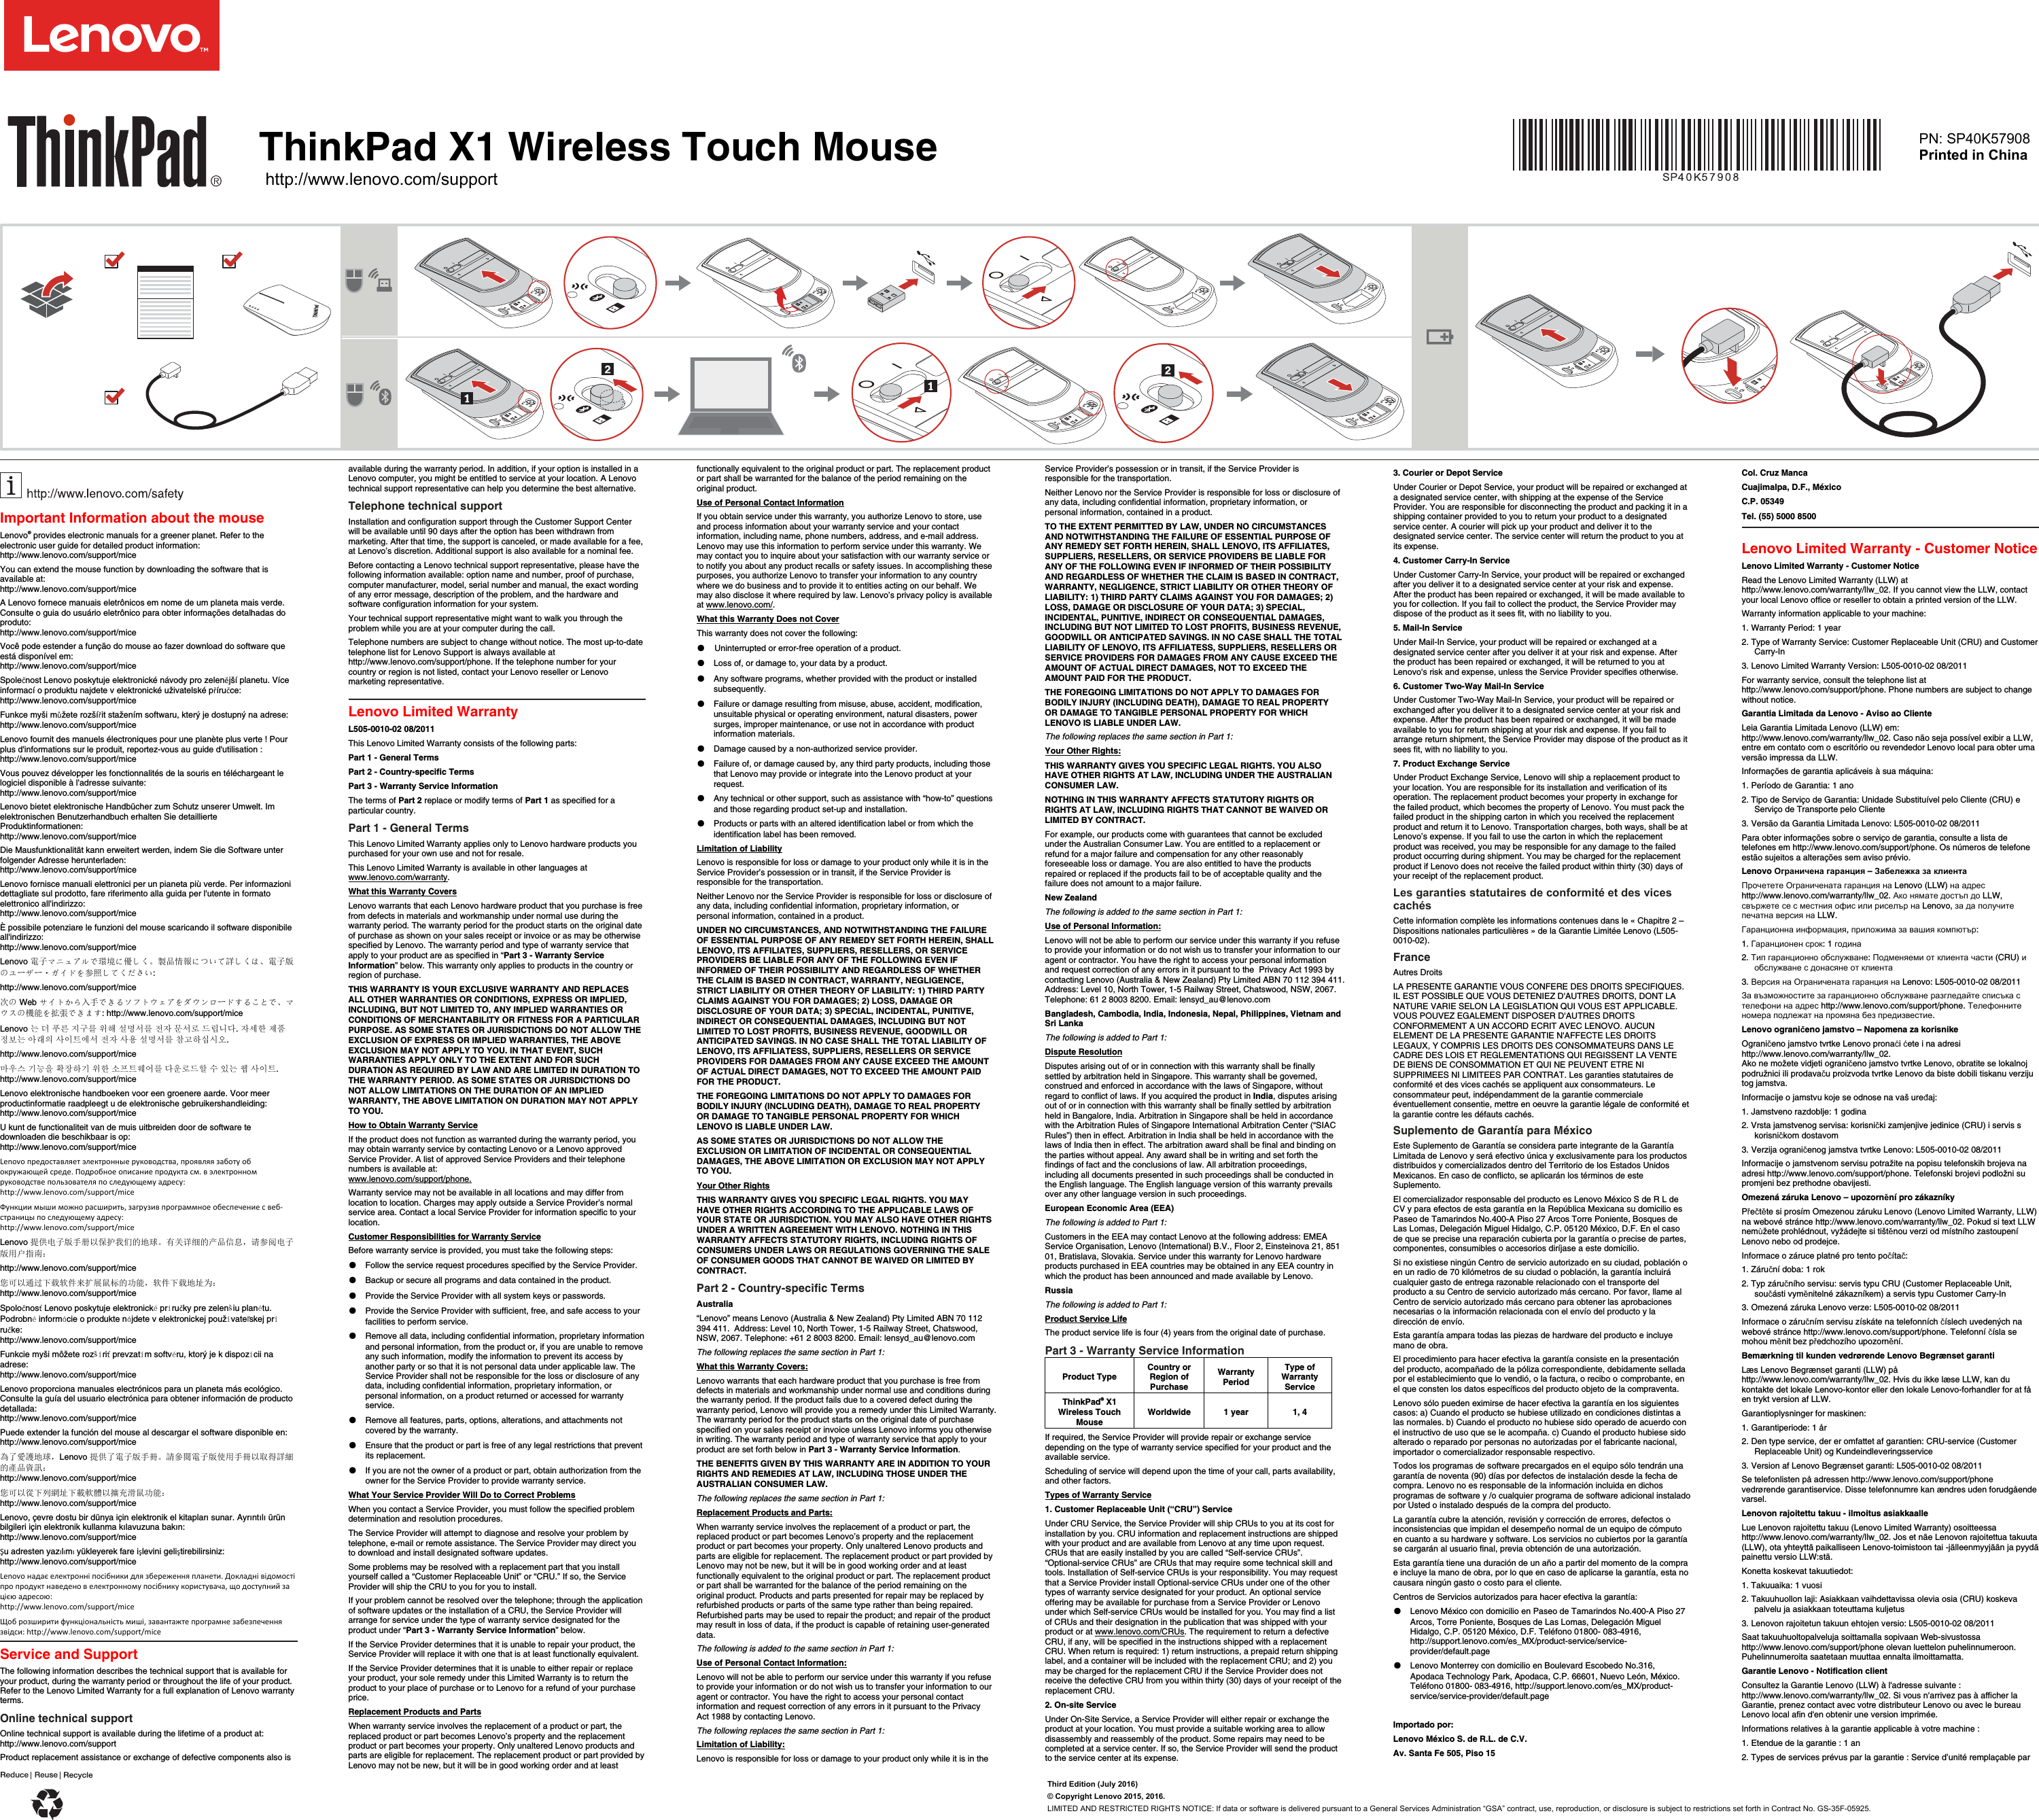 Page 1 of 2 - Lenovo Tpx1 Wirelesstmouse Sp40K57908 ThinkPad X1 Wireless Touch Mouse User Manual L570 (type 20J8, 20J9) Laptops (Think Pad) - Type 20J8